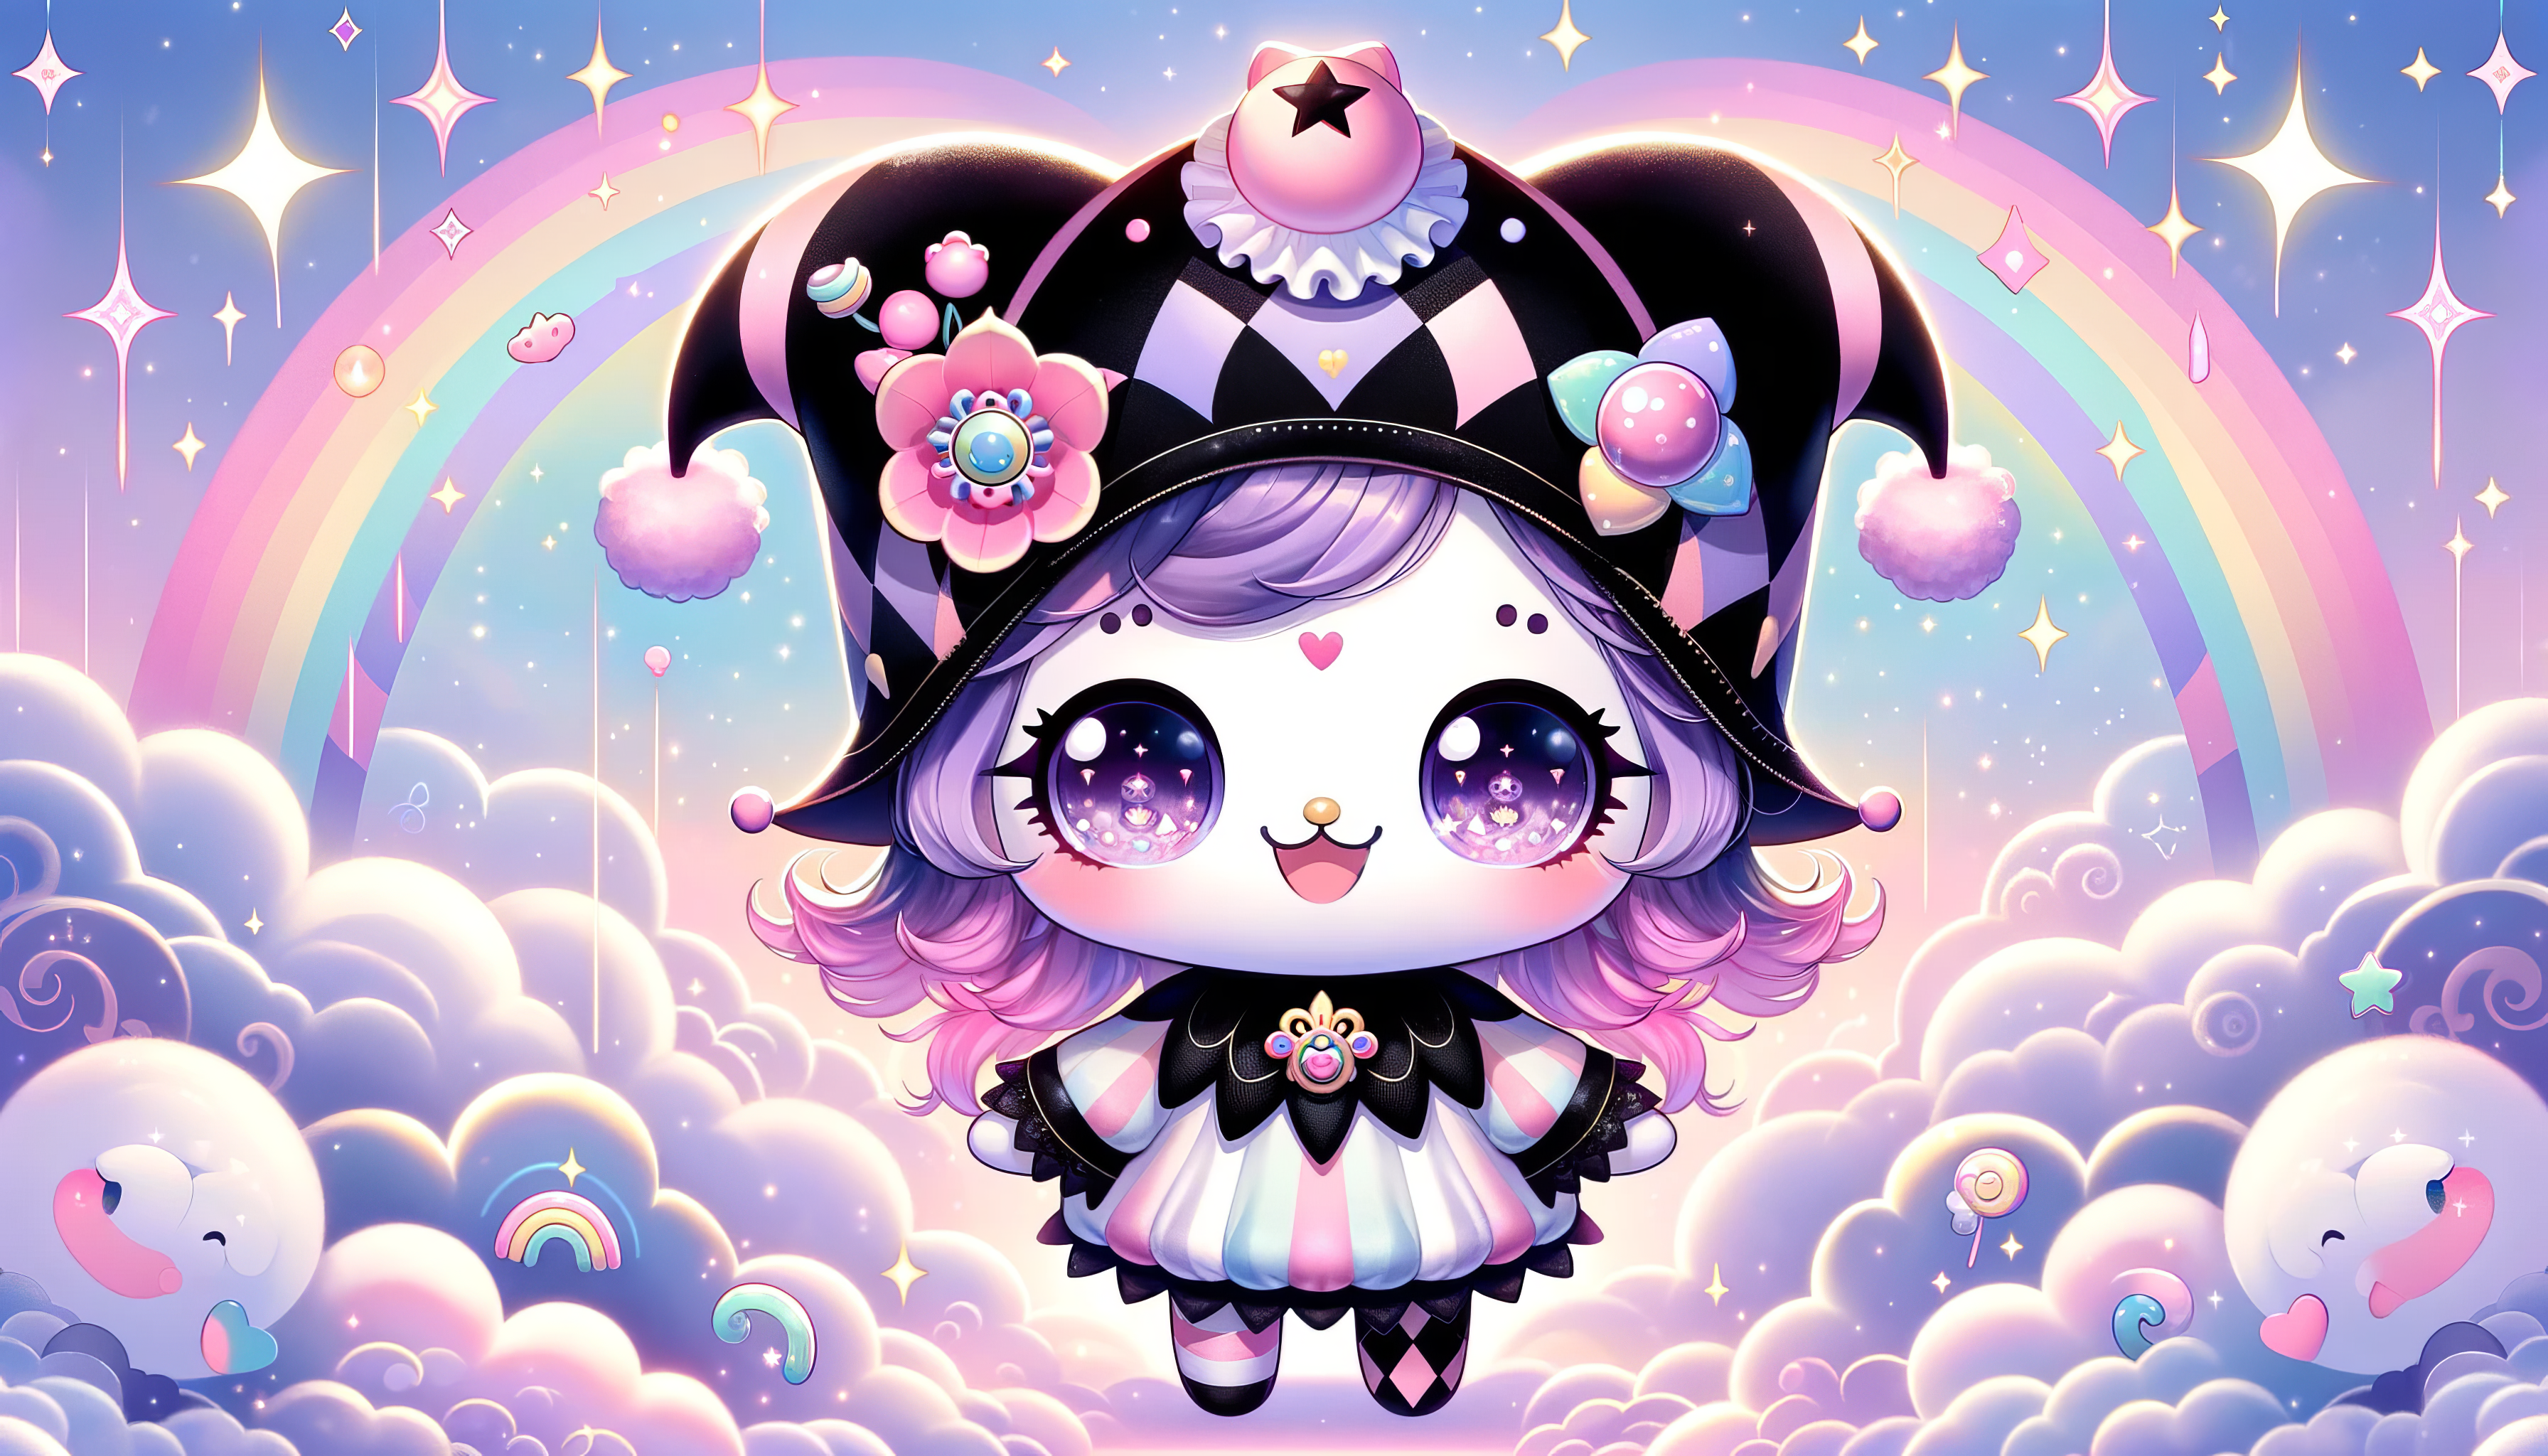 HD desktop wallpaper featuring Kuromi from Hello Kitty, with a whimsical pastel background with clouds, stars, and rainbows.